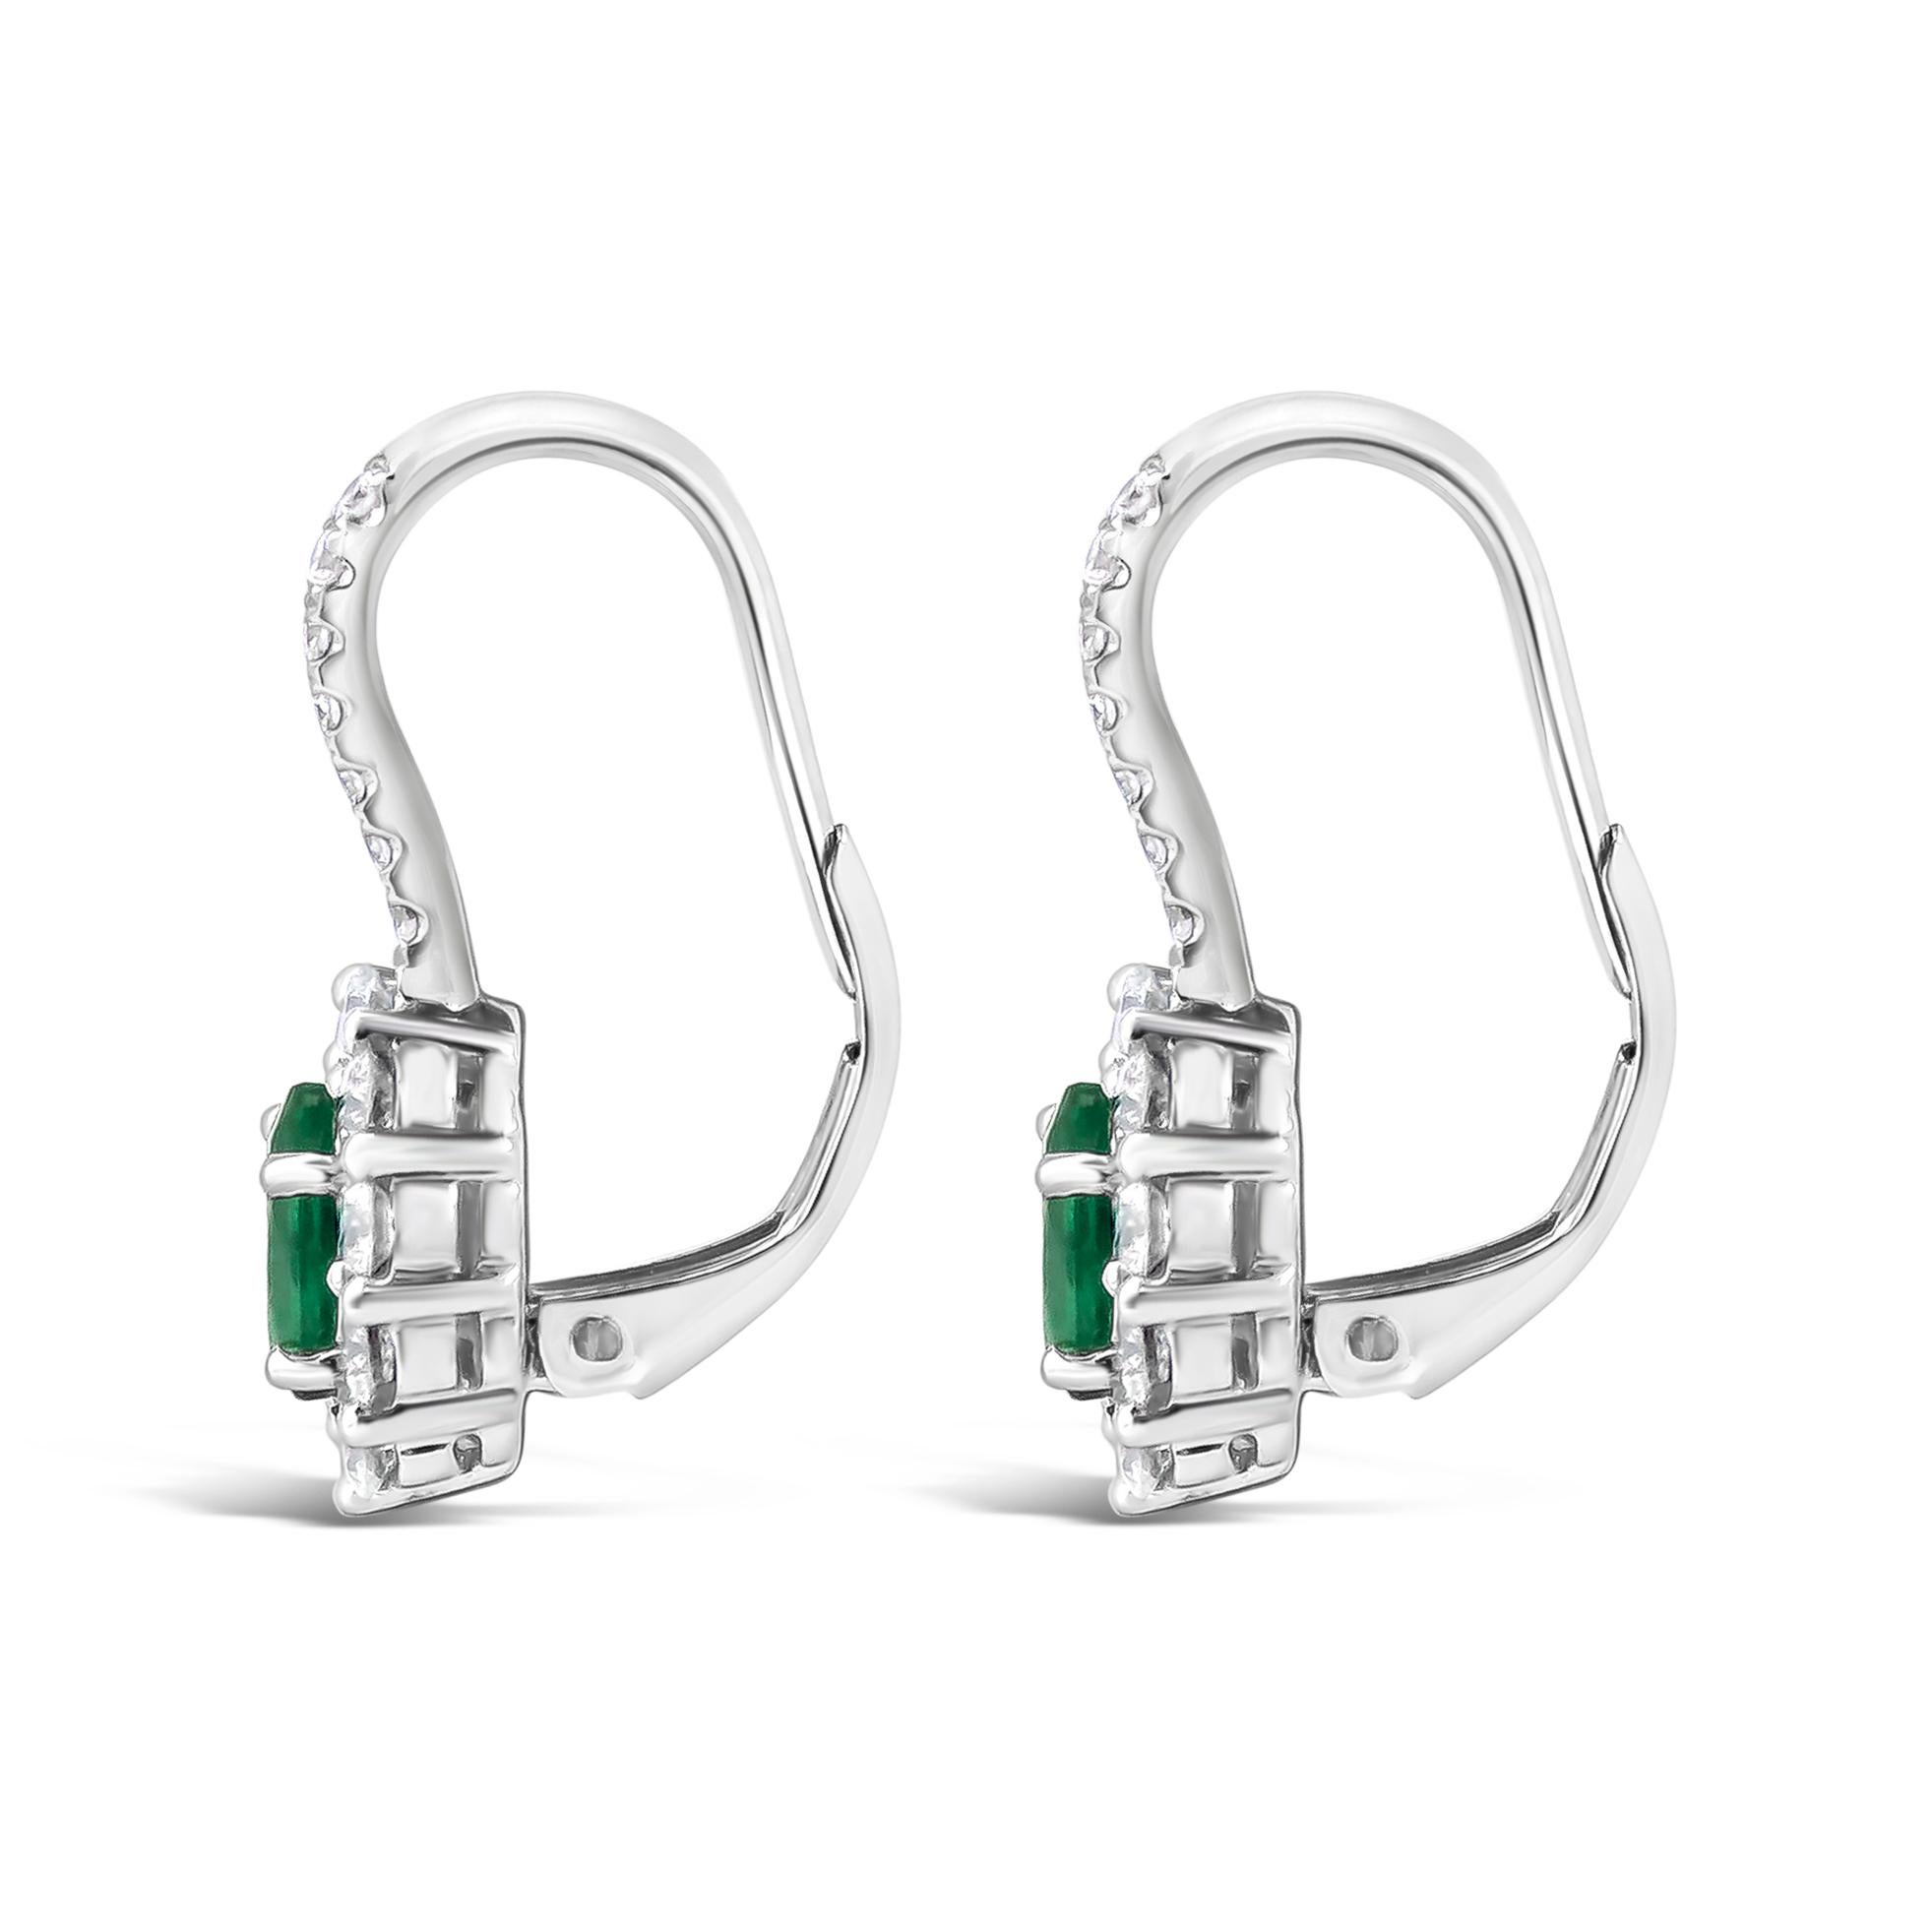 Showcases color-rich green emeralds weighing 0.78 carats total, elegantly set in a diamond surround. Attached to an 18K white gold lever-back accented with diamonds. Diamonds weigh 0.92 carats total.

Style available in different price ranges.